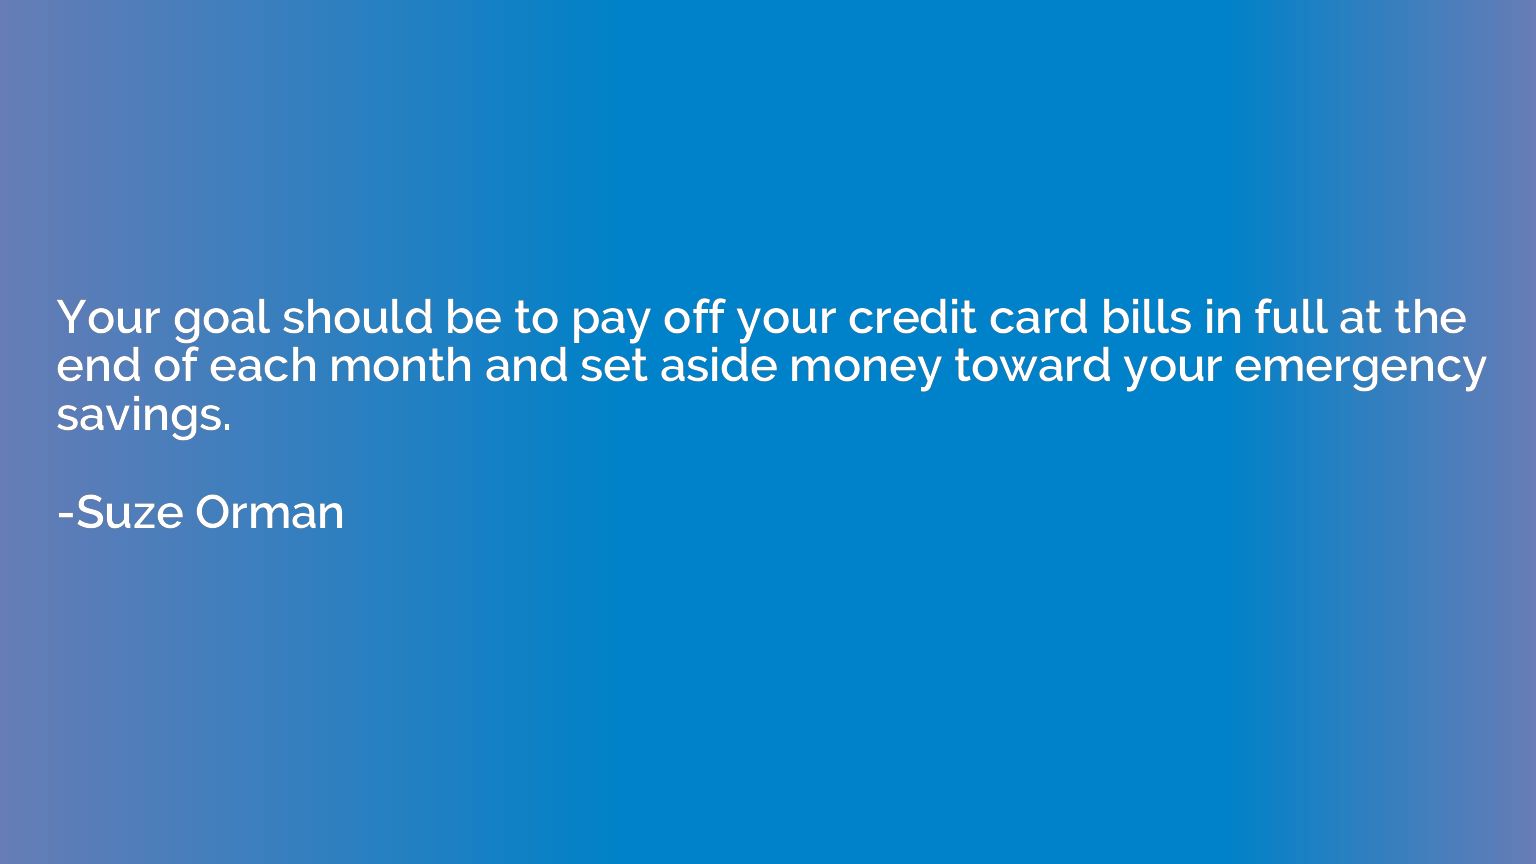 Your goal should be to pay off your credit card bills in ful